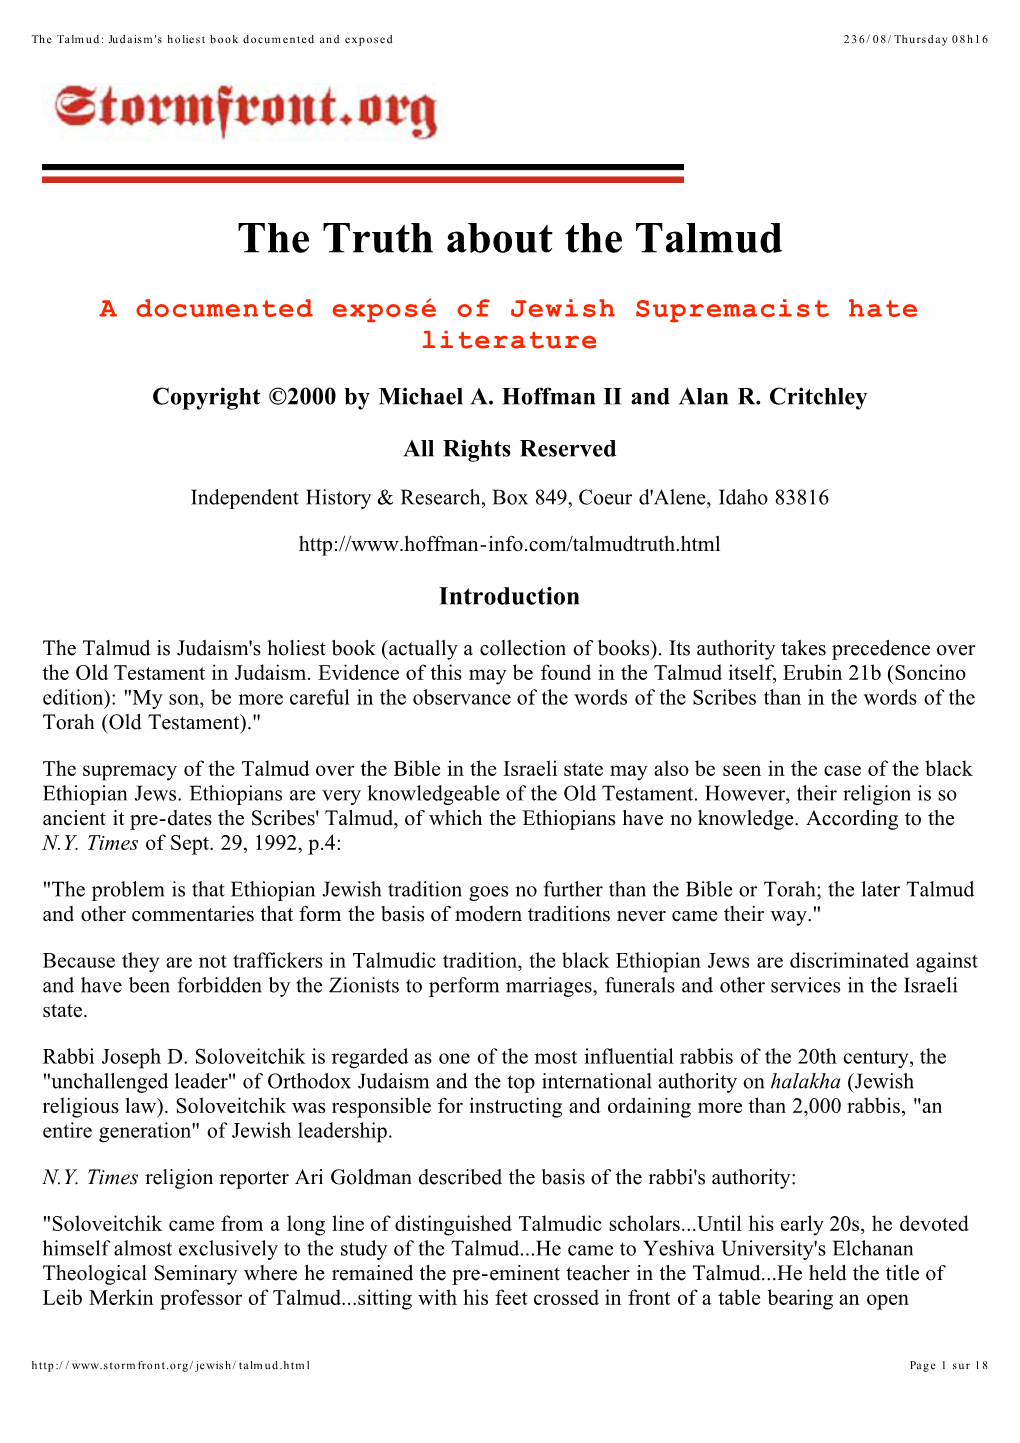 The Truth About the Talmud